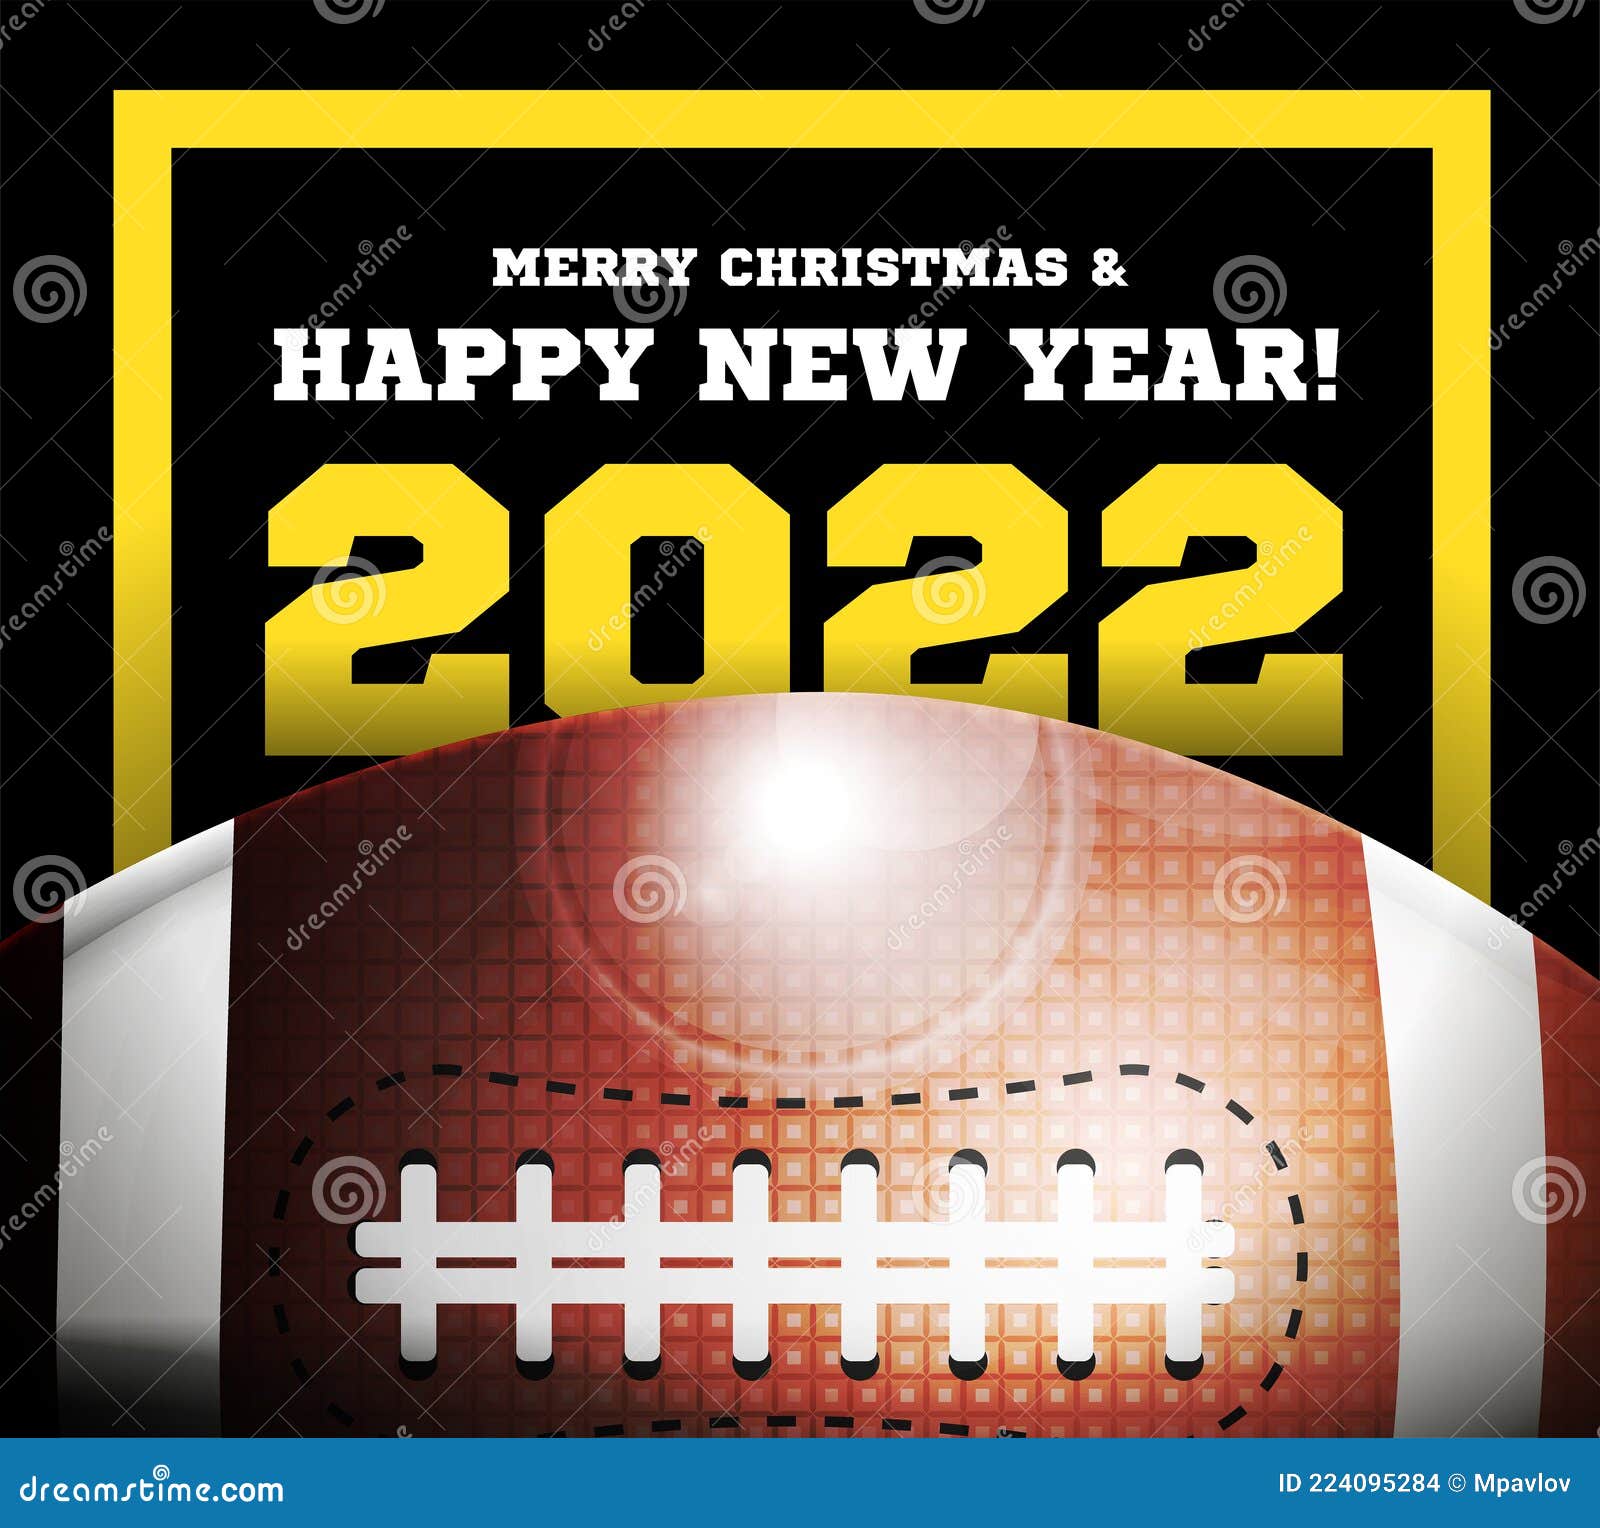 Happy New Year 2022 on the Background of a Ball for Football. Vector Stock  Vector - Illustration of text, football: 224095284